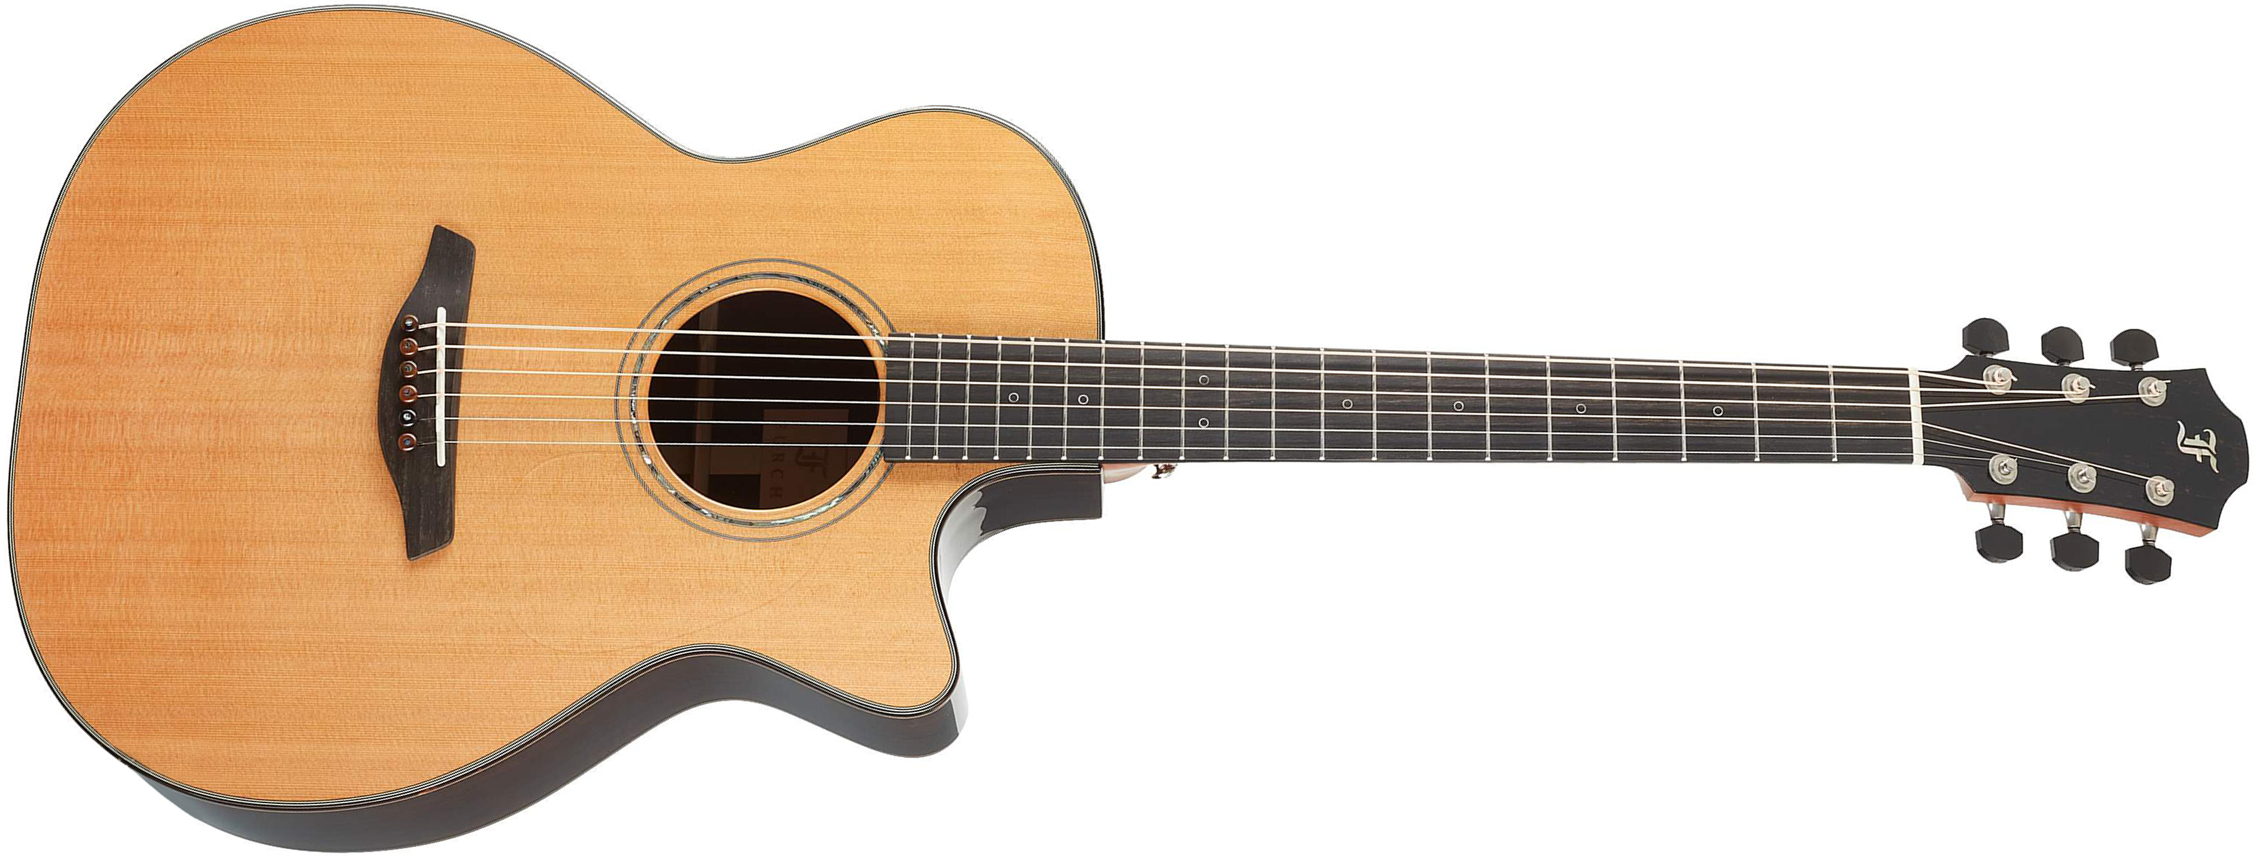 Furch Omc-cr Lrb1 Yellow Orchestra Model Cw Cedre Palissandre Eb - Natural Full-pore - Electro acoustic guitar - Main picture